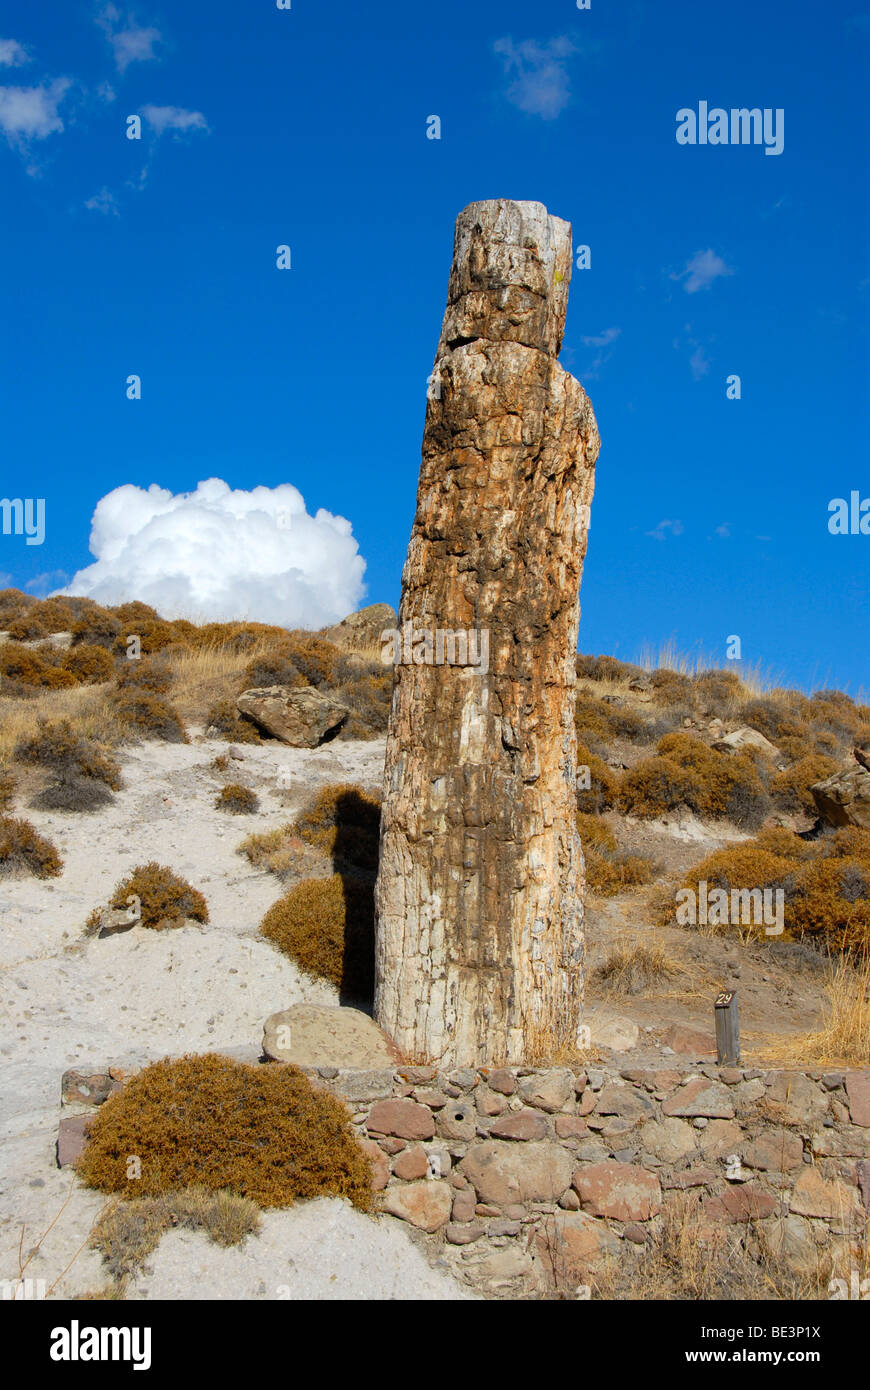 Petrified standing tree trunk, petrified forest between Sigri and Antissa, Lesbos Island, Aegean Sea, Greece, Europe Stock Photo